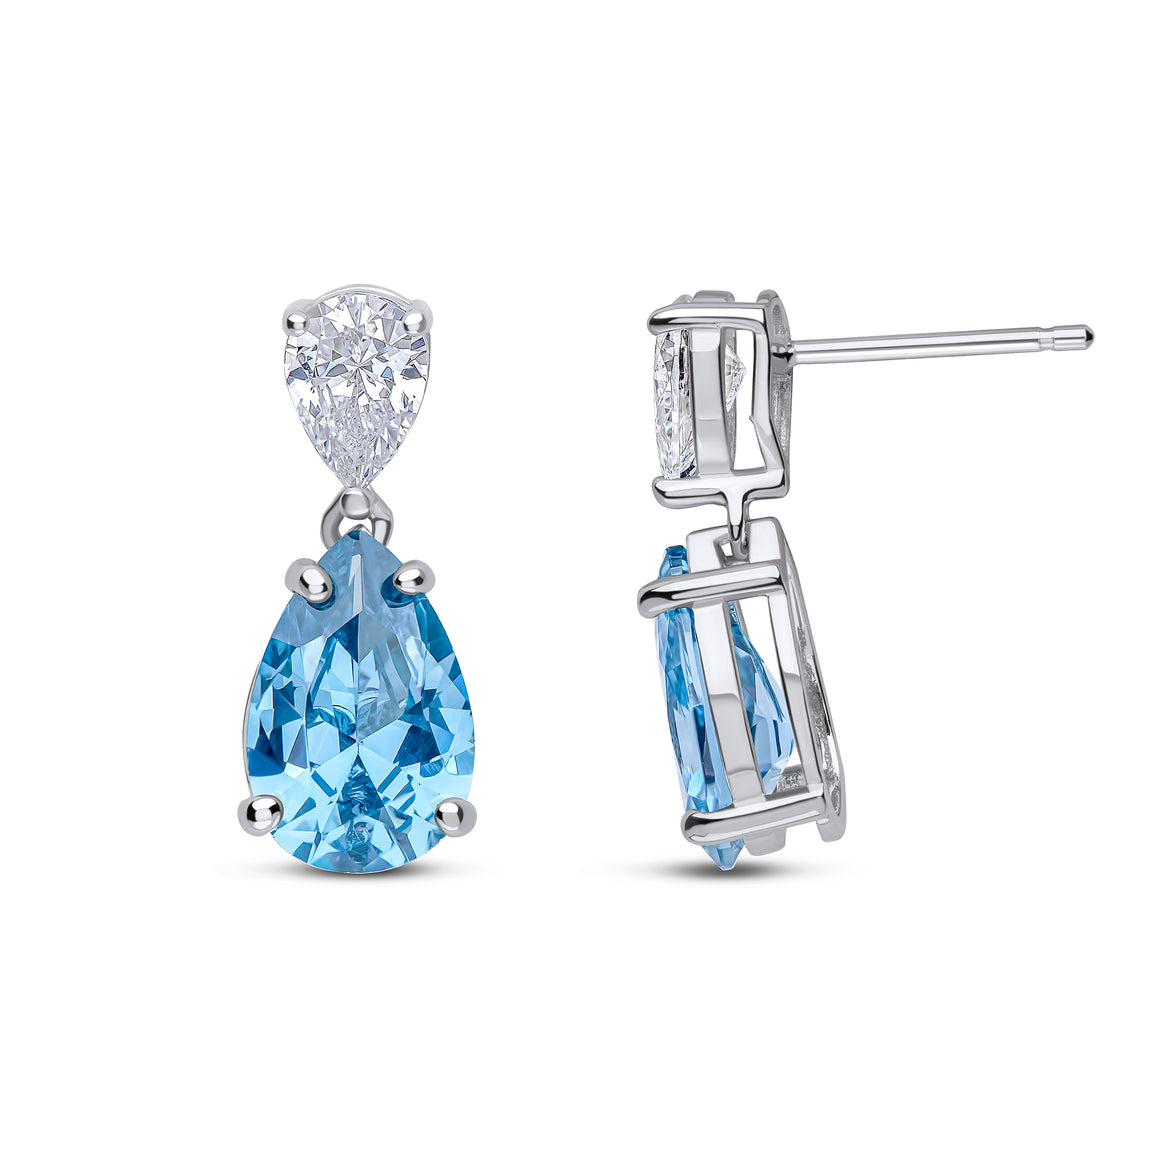 The Finest Cubic Zirconia Jewellery Since 1917 – C I R O